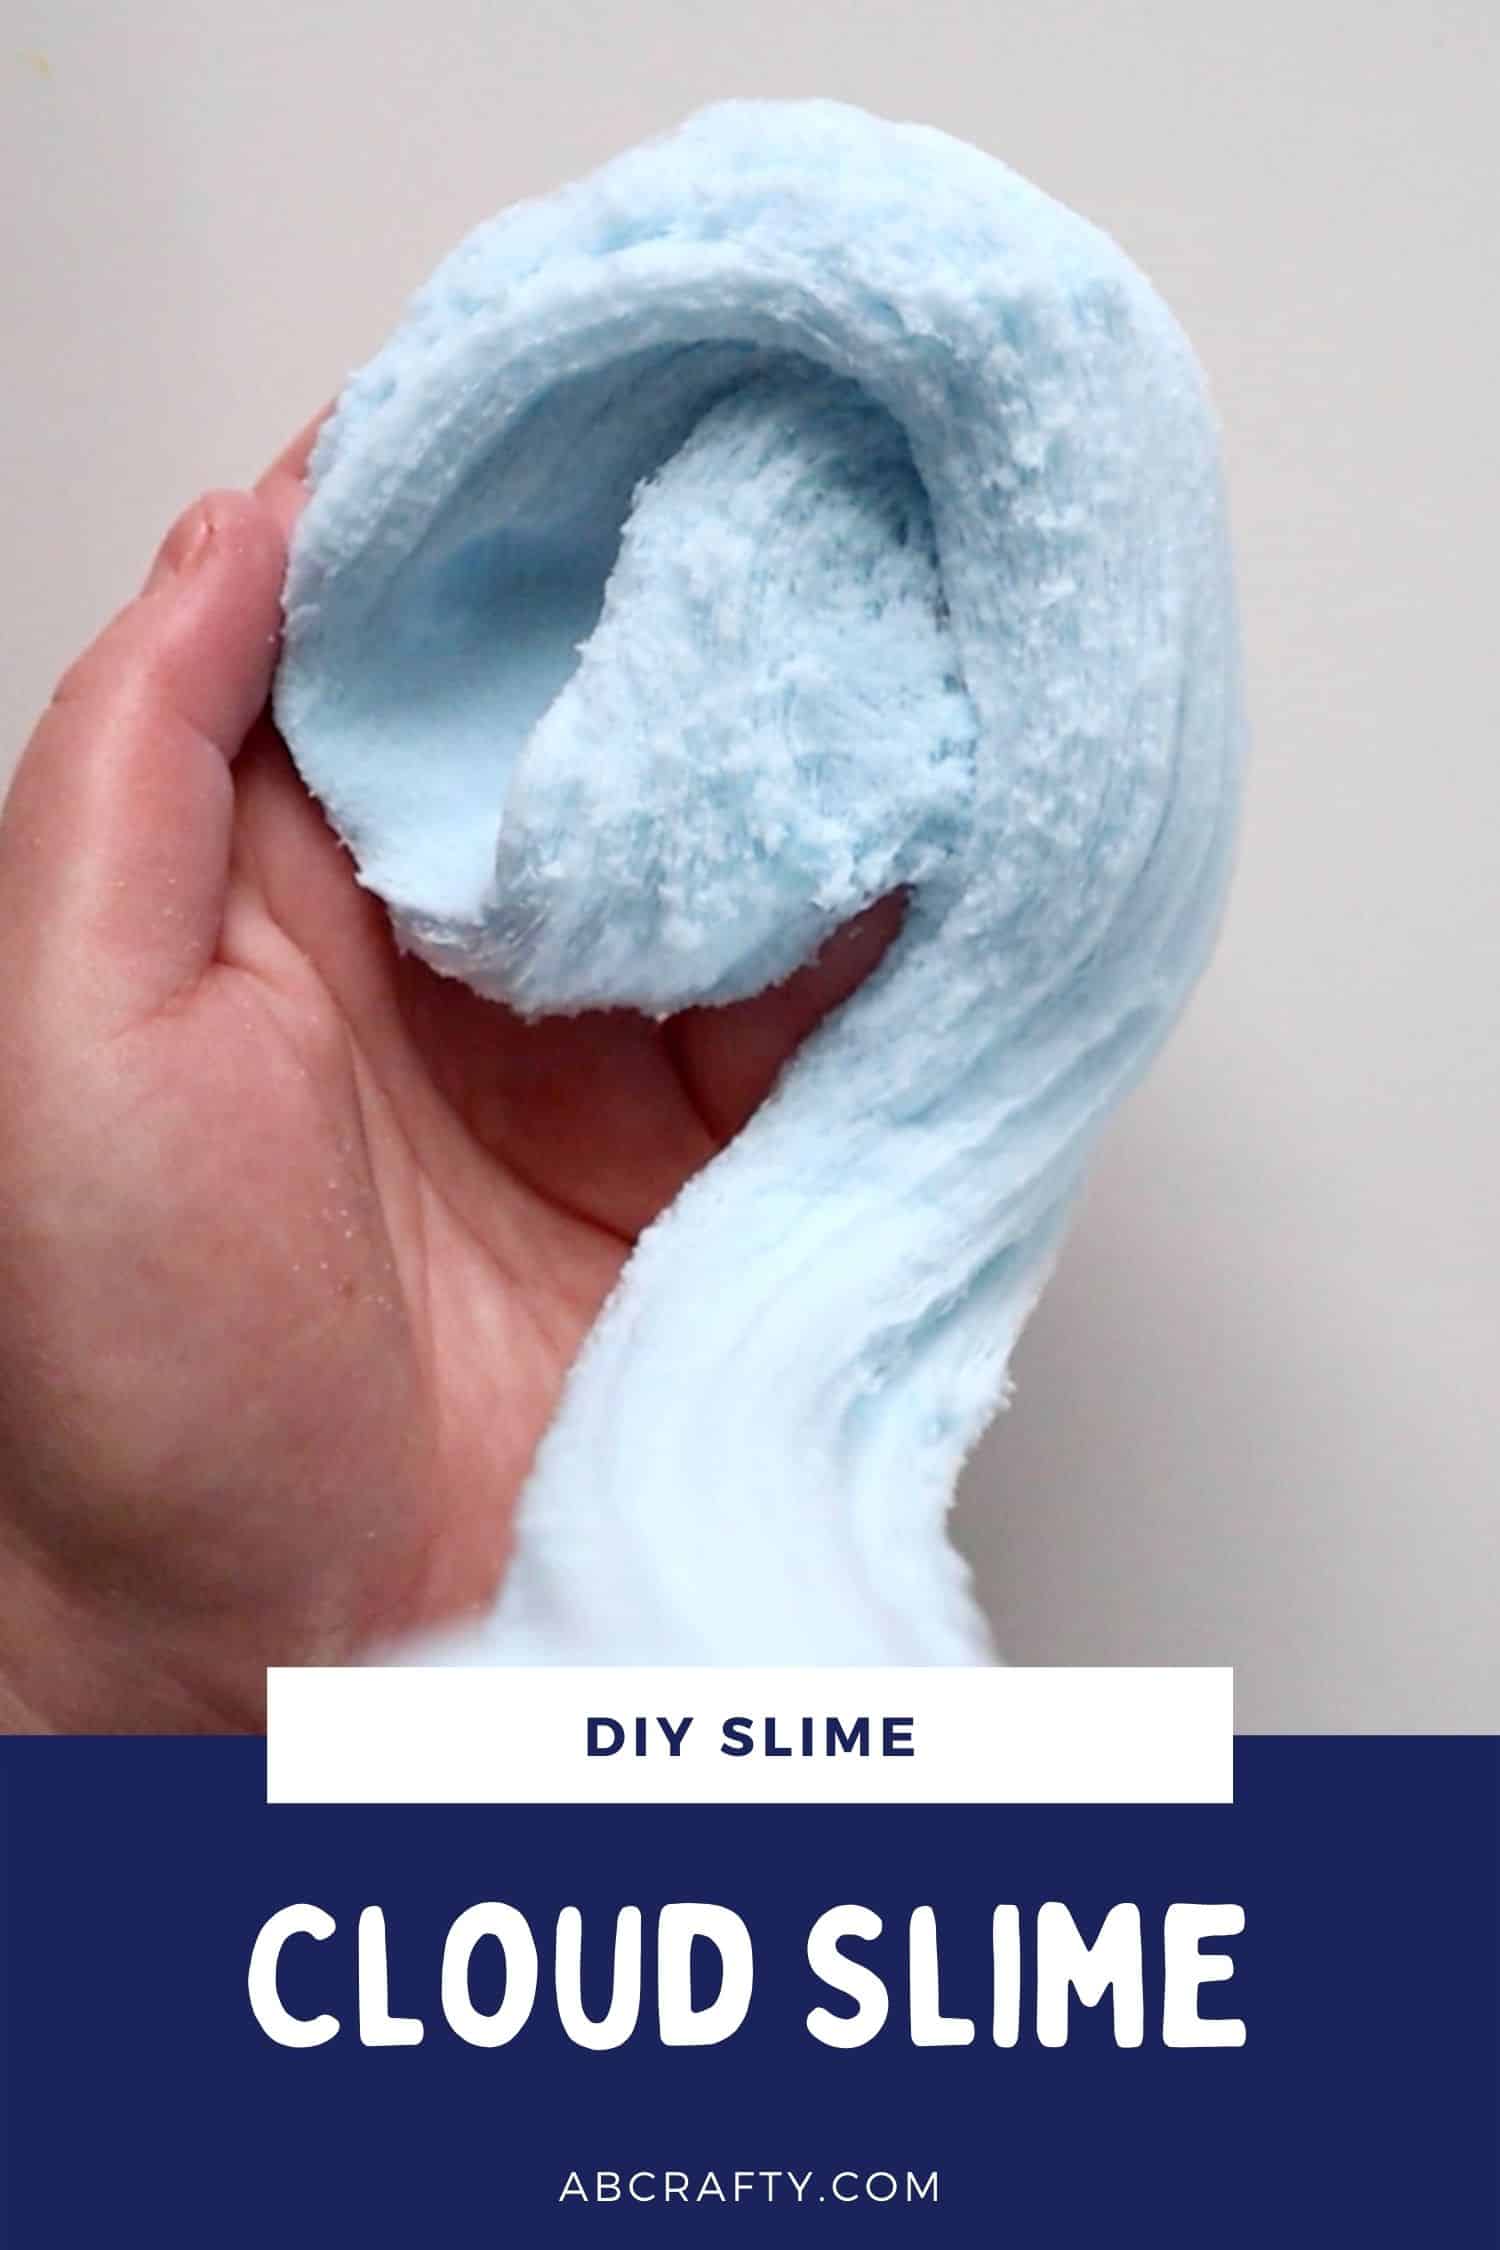 Space Make Your Own Slime Set